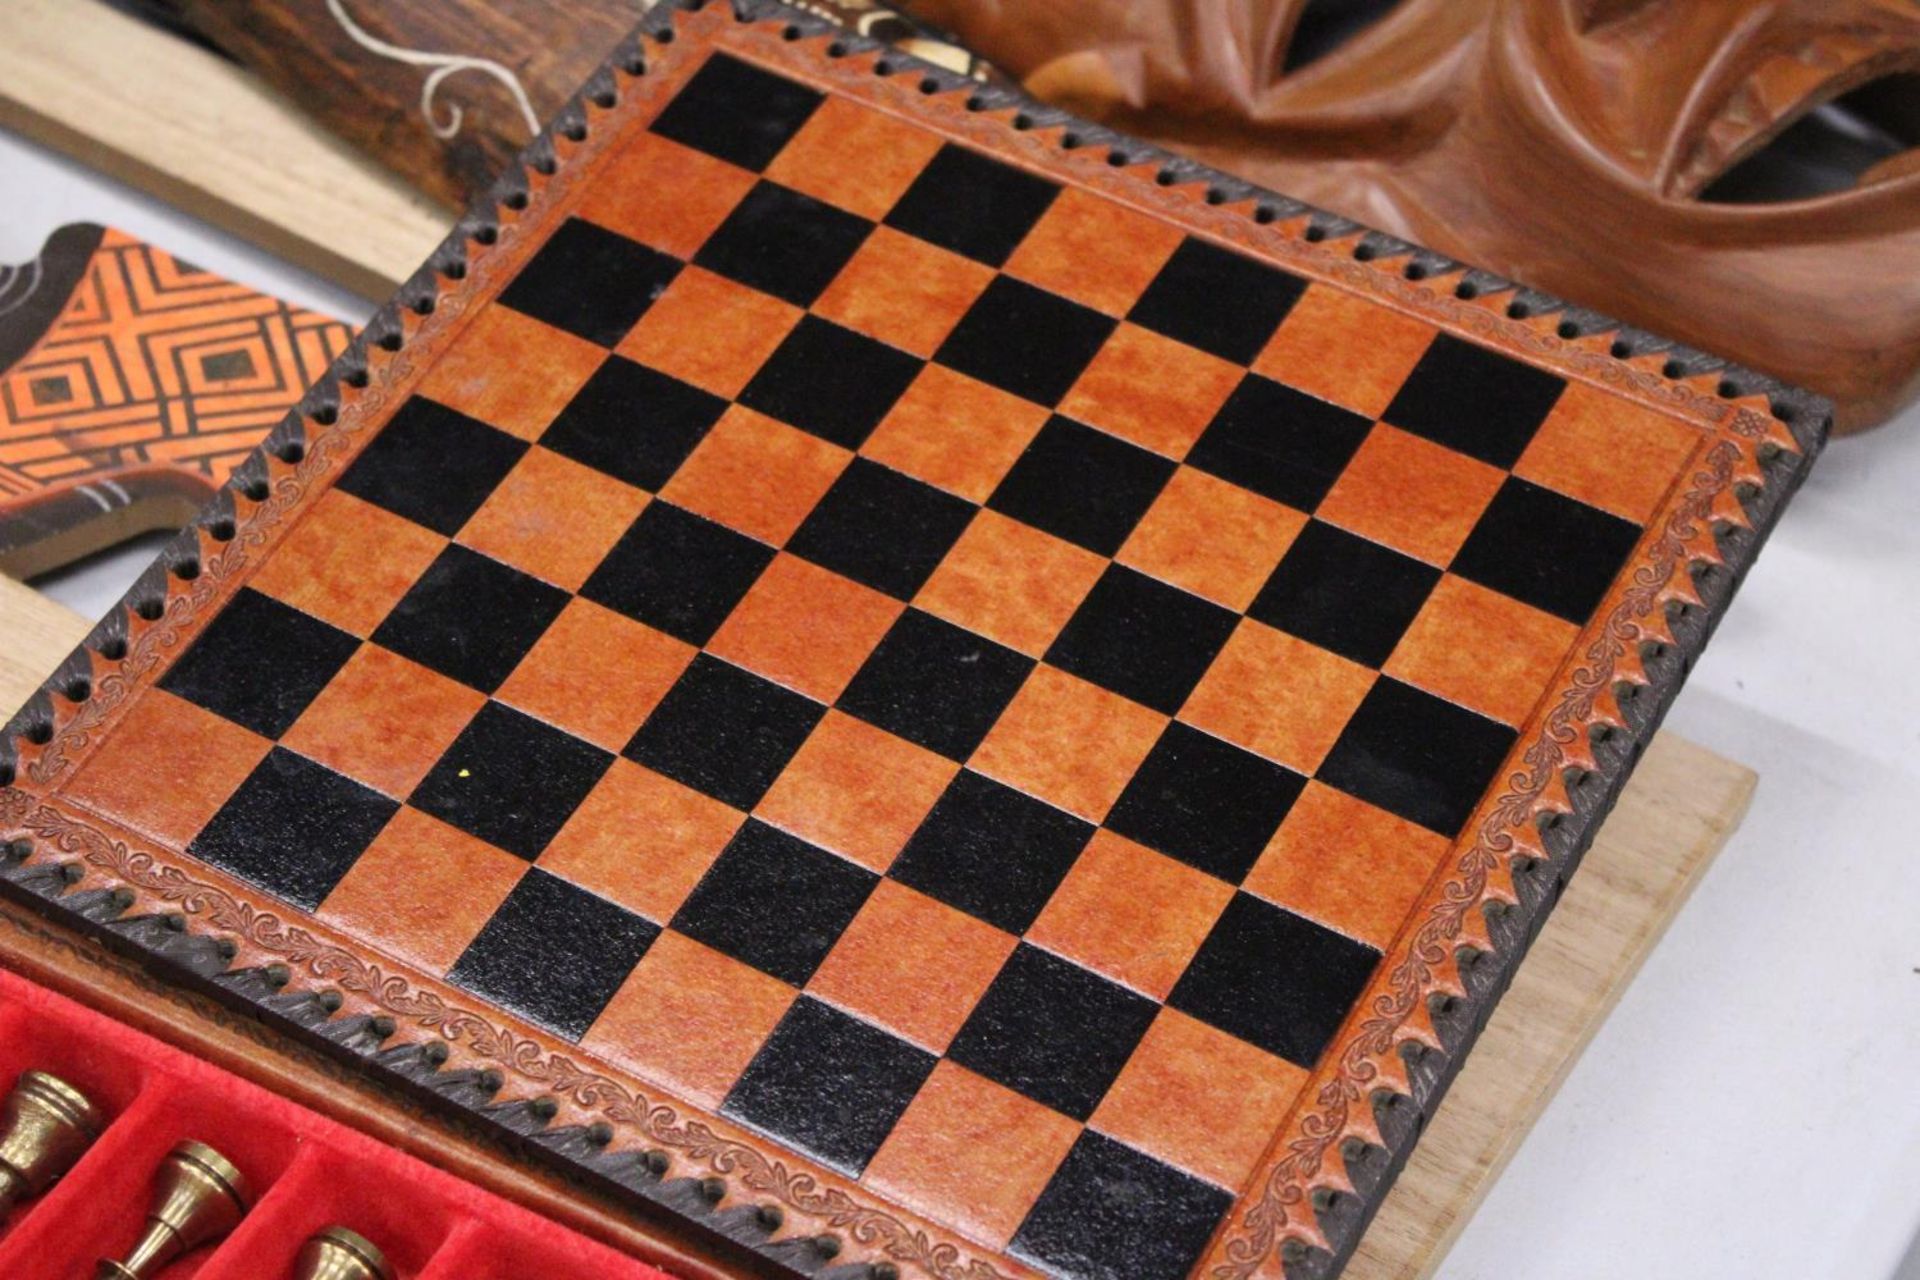 A LEATHERBOUND CHESS BOARD WITH METAL CHESS PIECES - COMPLETE - Image 5 of 5